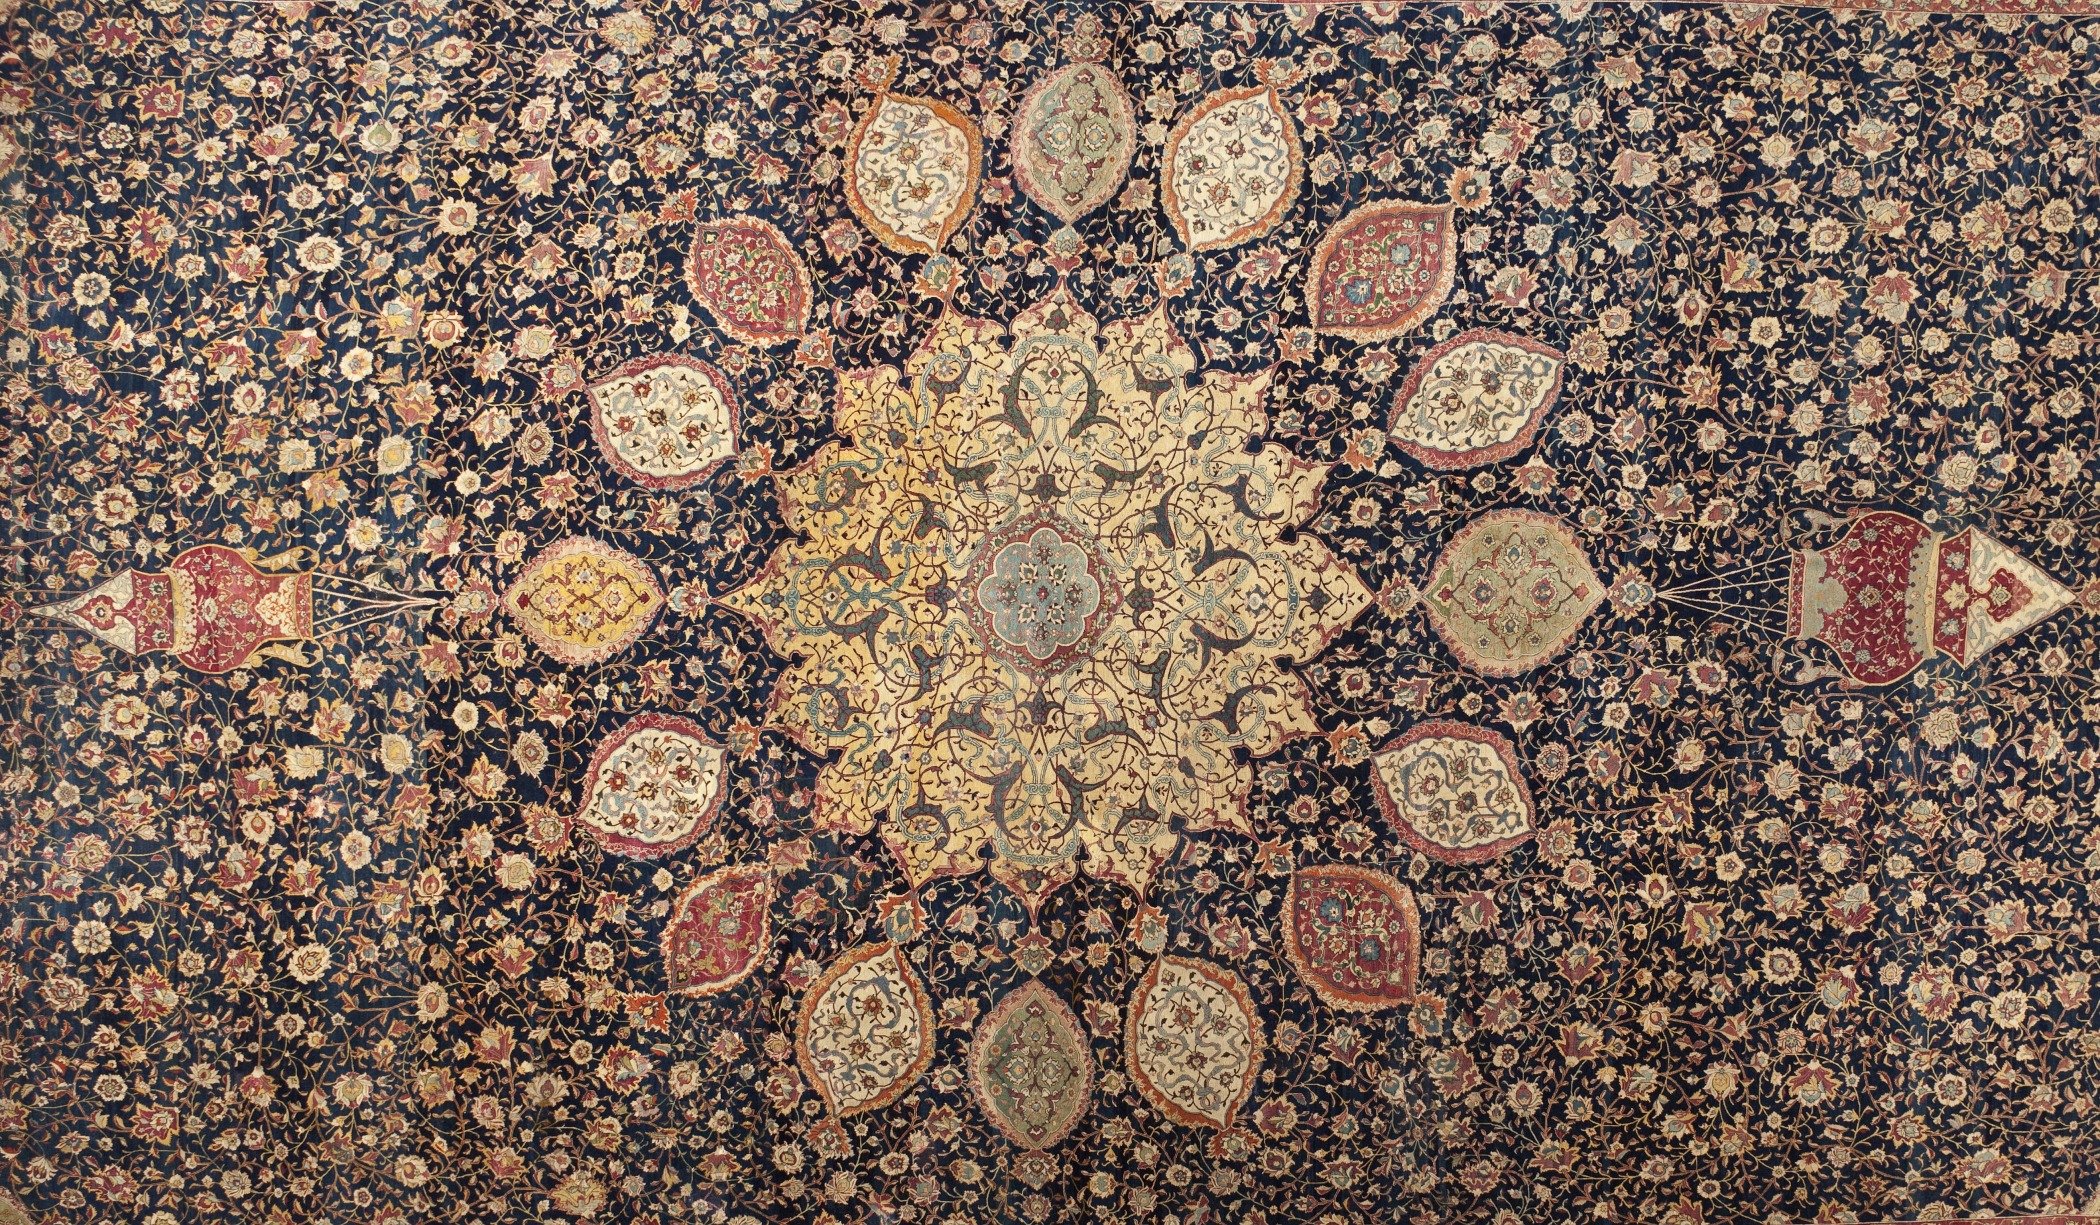 Ardabil Carpet (source: LACMA; Los Angeles County Museum of Art)